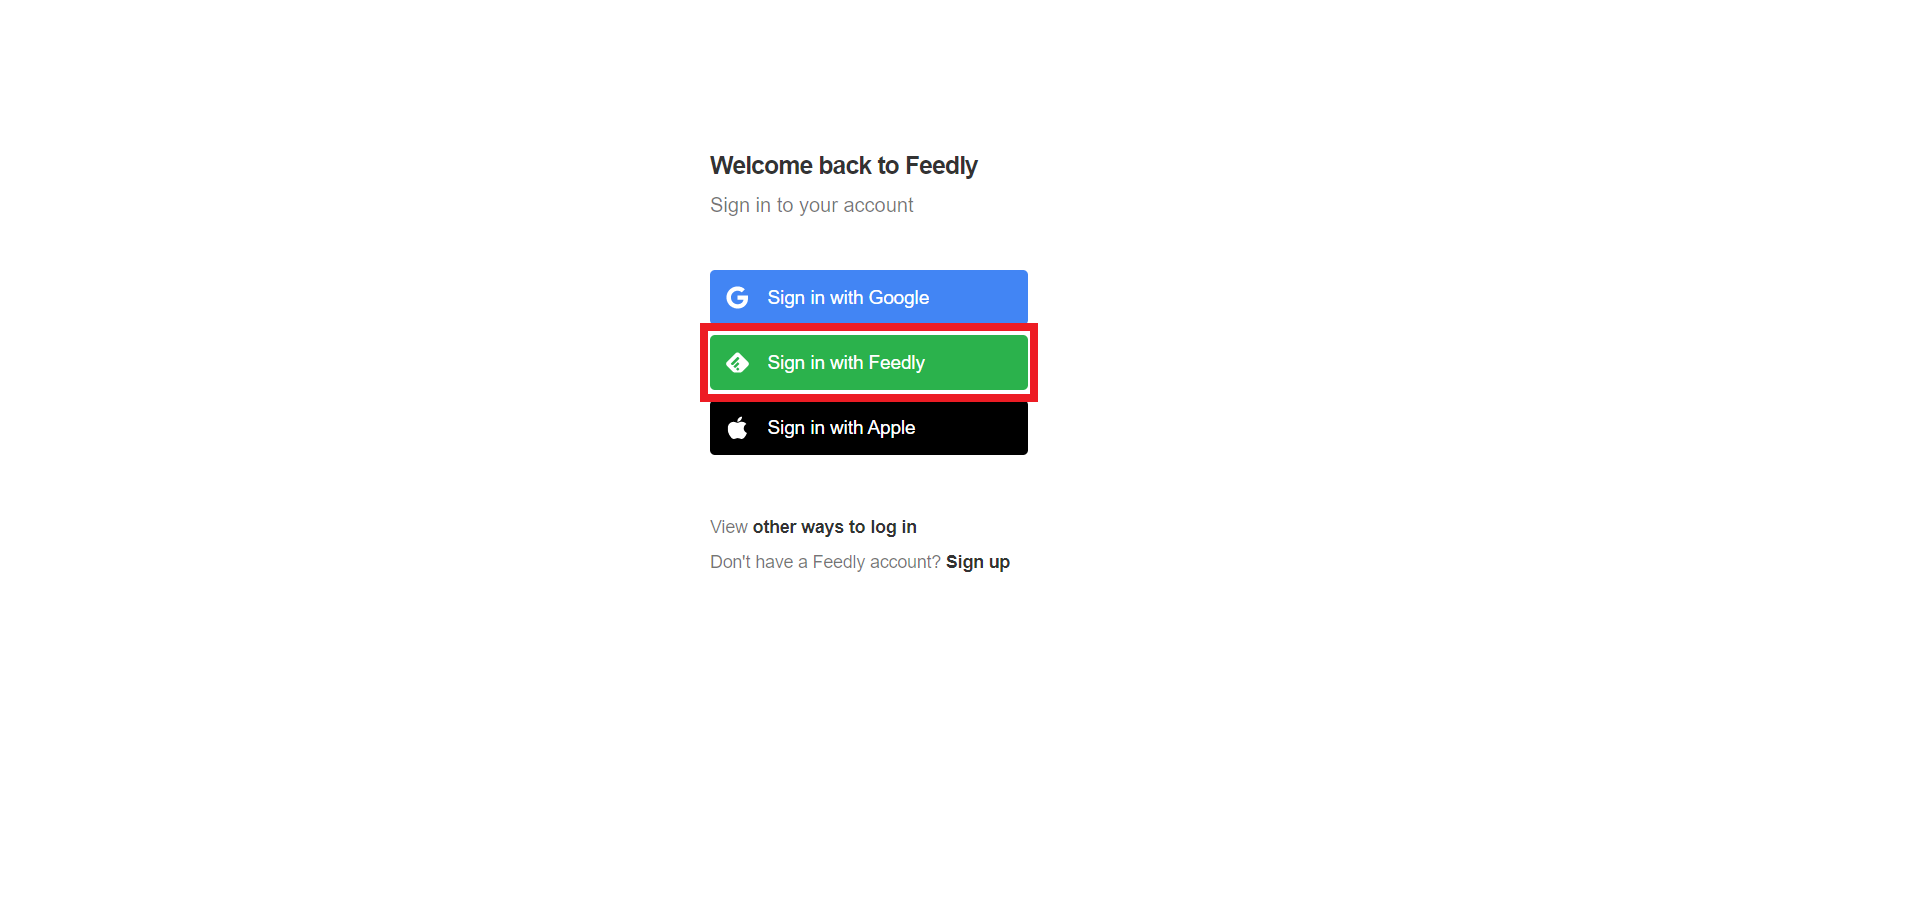 Sign in with Feedly